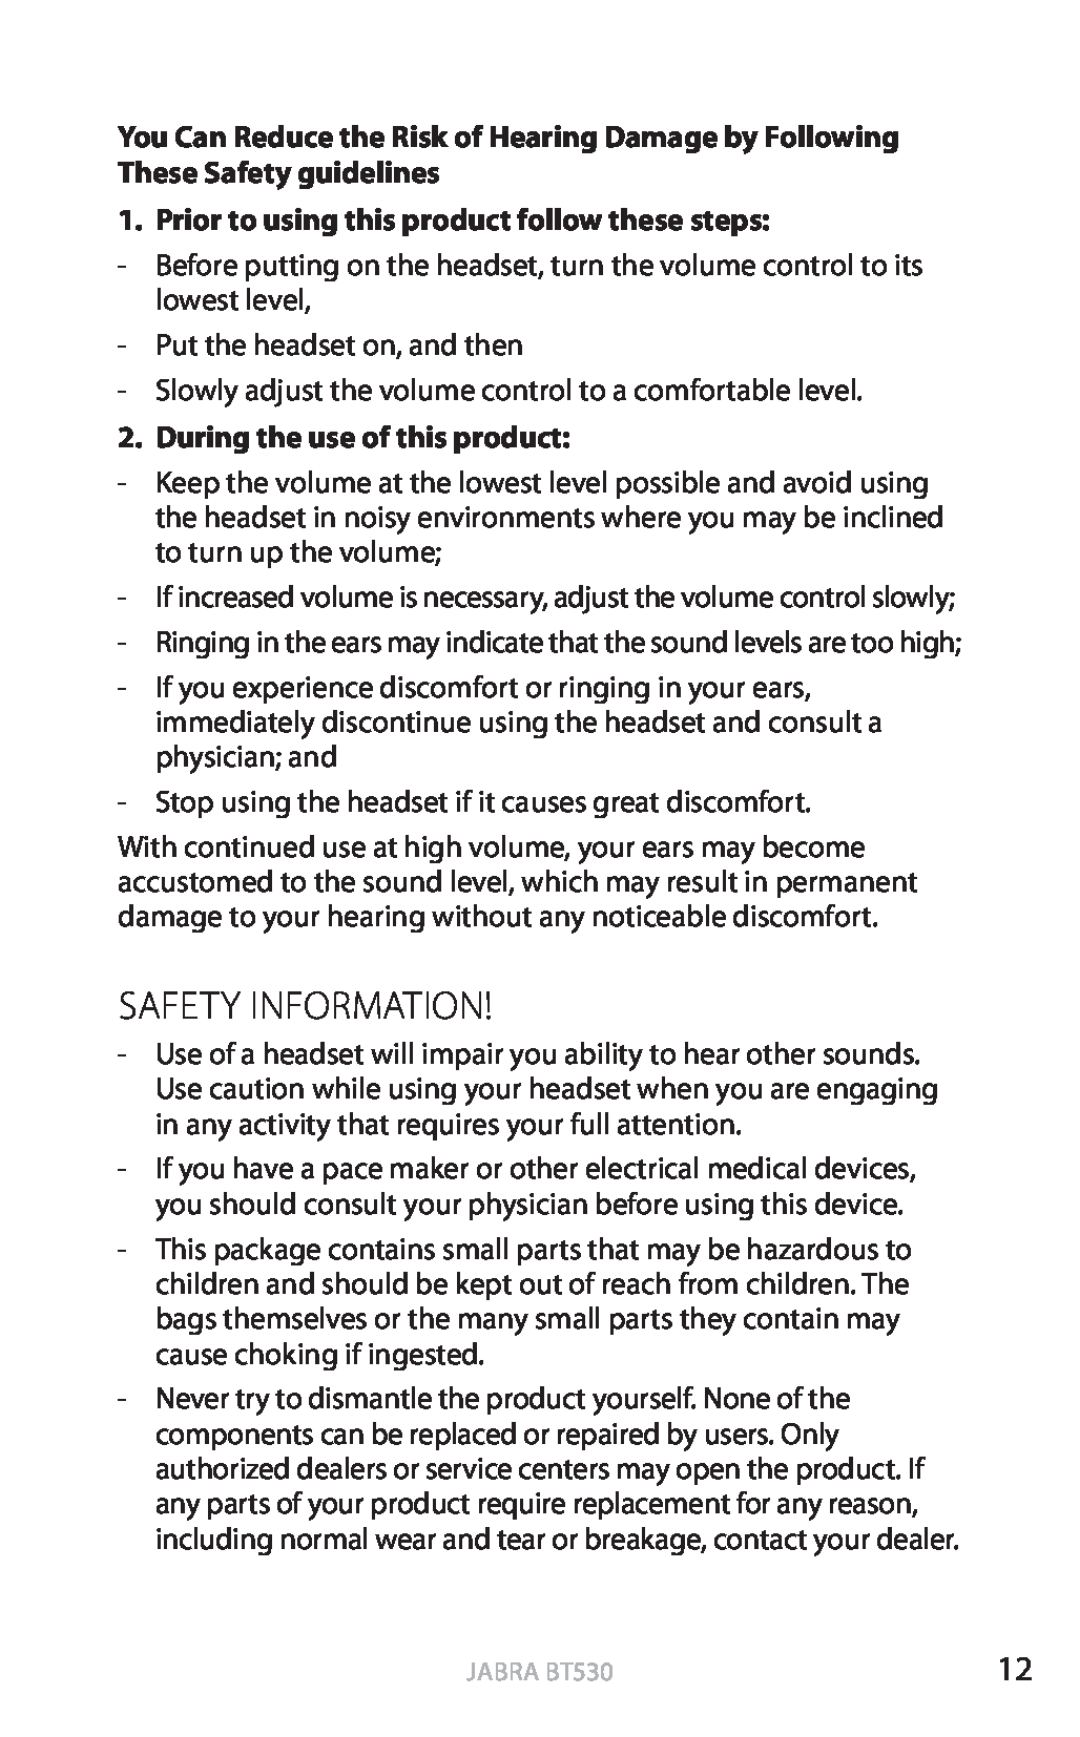 Jabra BT530 Safety Information, Prior to using this product follow these steps, During the use of this product, english 